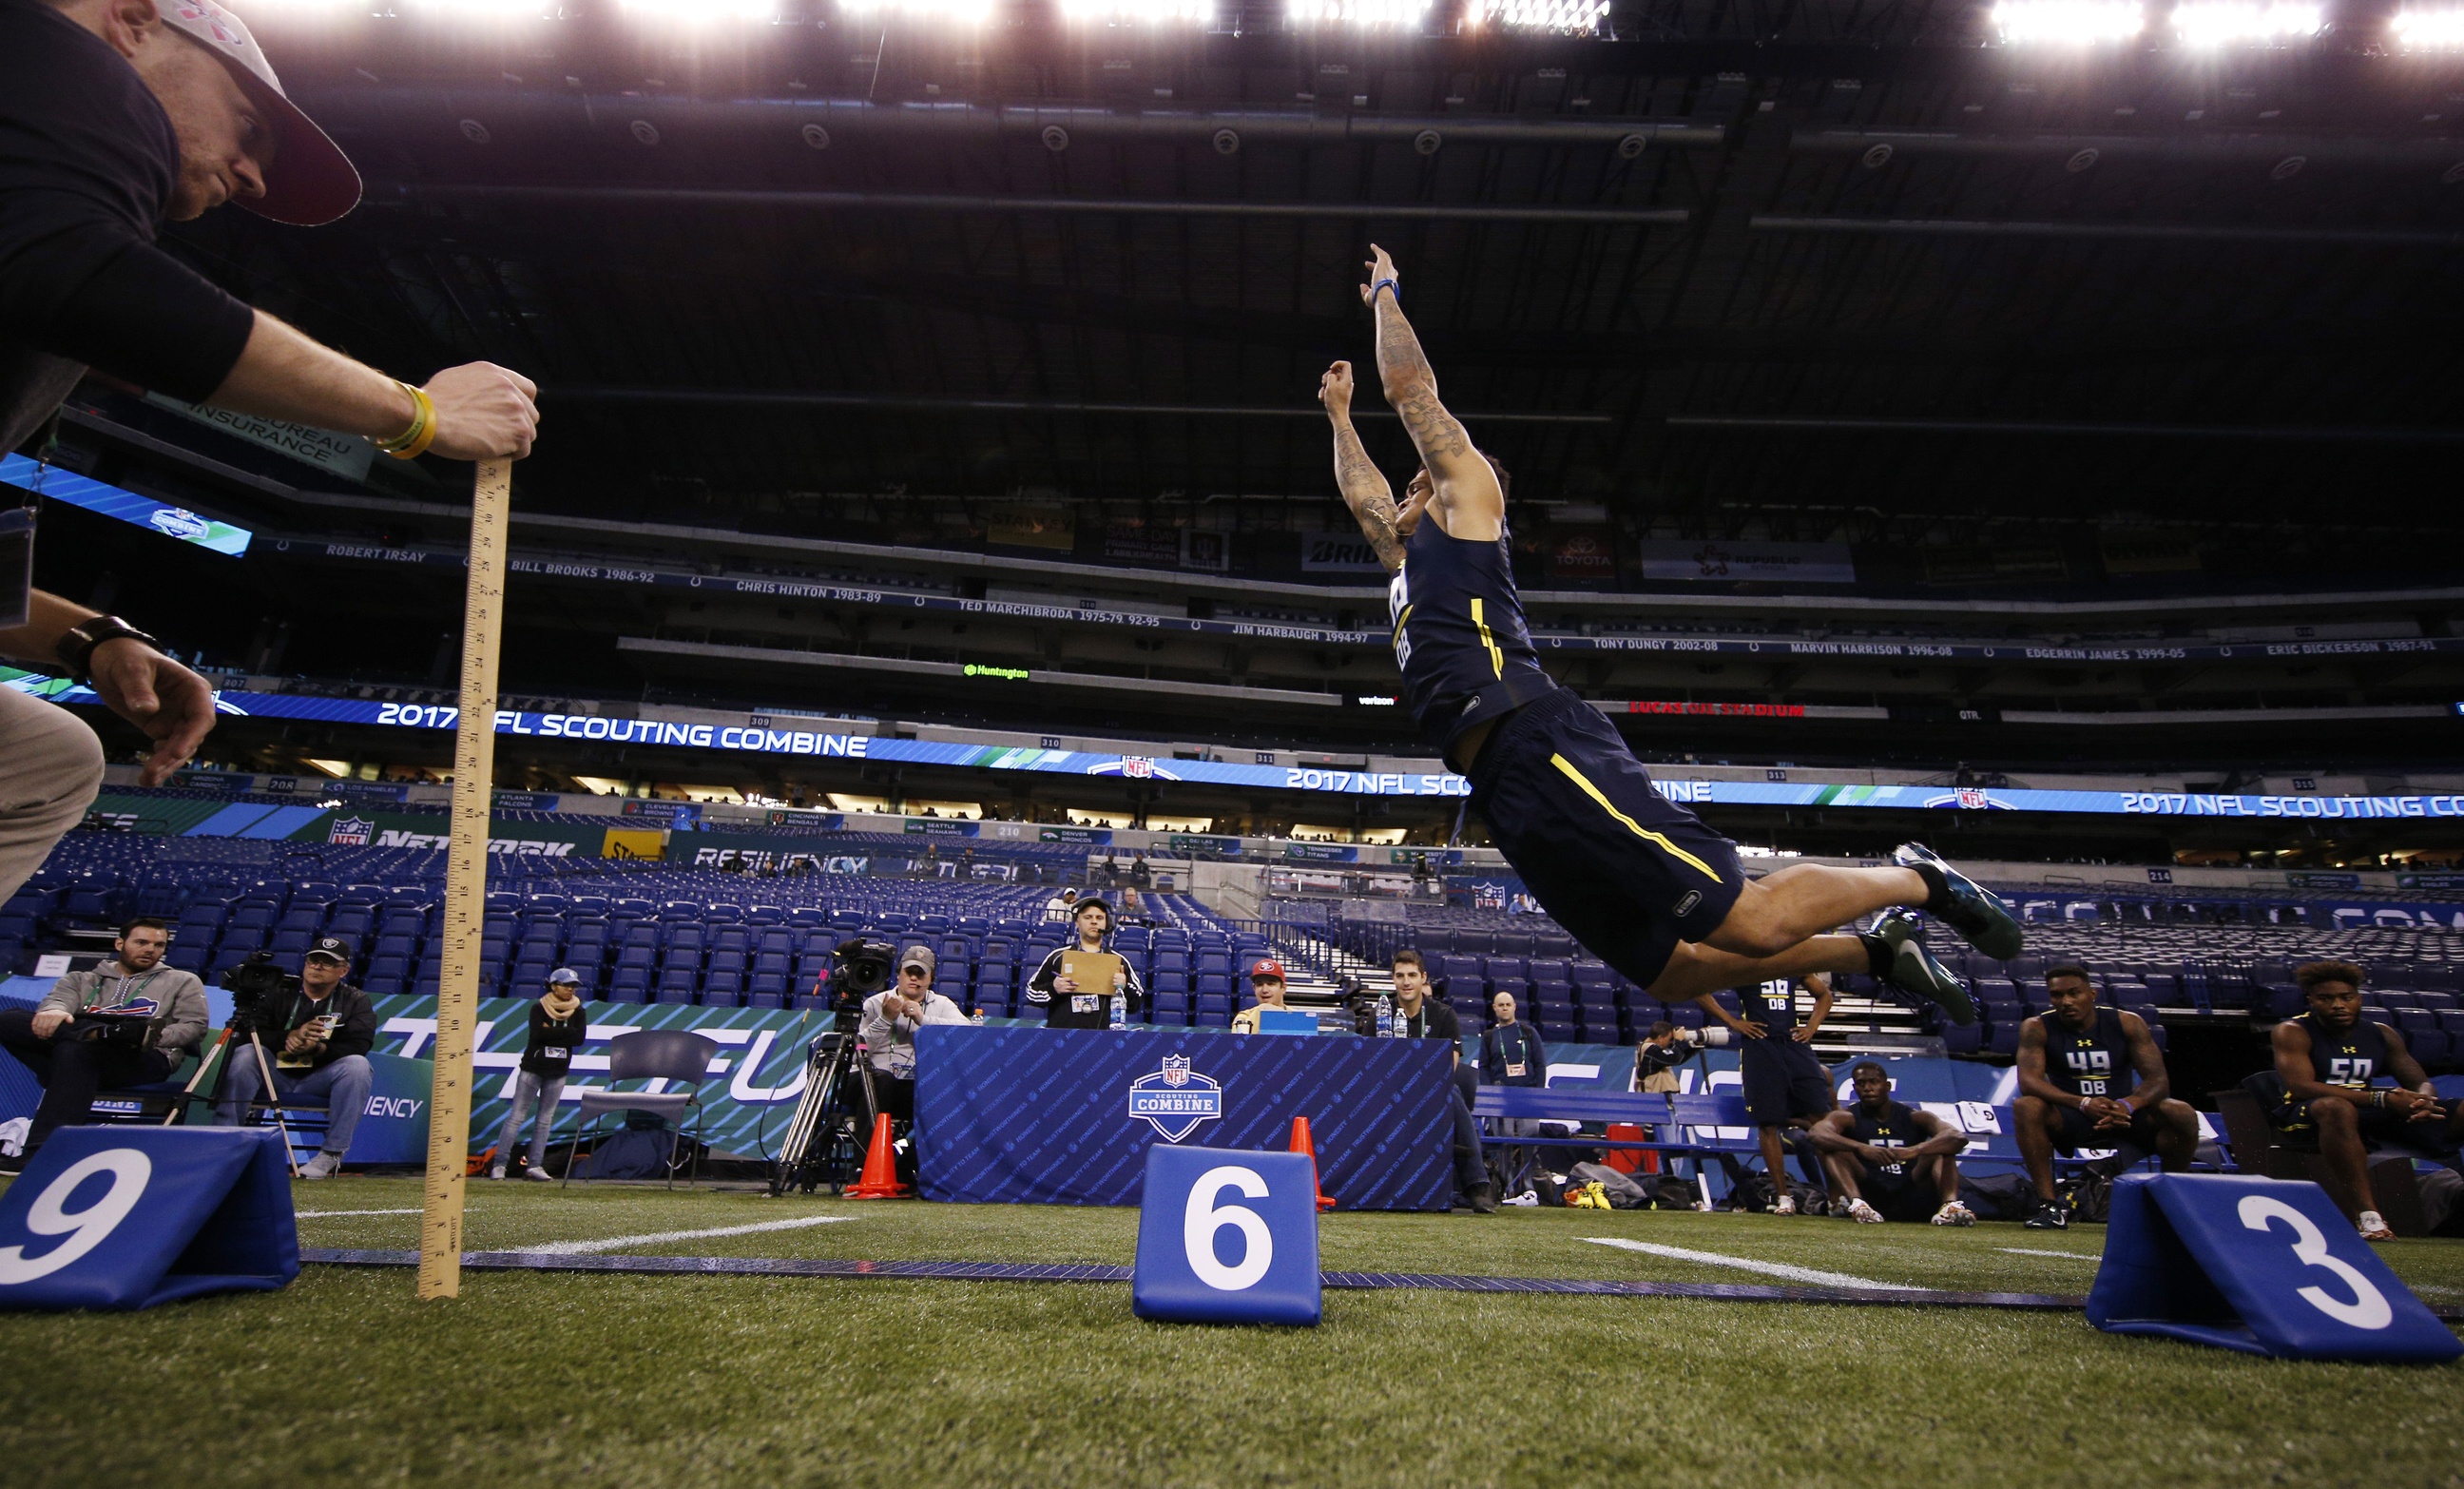 Mar 6, 2017; Indianapolis, IN, USA; Florida Gators defensive back Teez Tabor does the broad jump during the 2017 NFL Combine at Lucas Oil Stadium. Mandatory Credit: Brian Spurlock-USA TODAY Sports